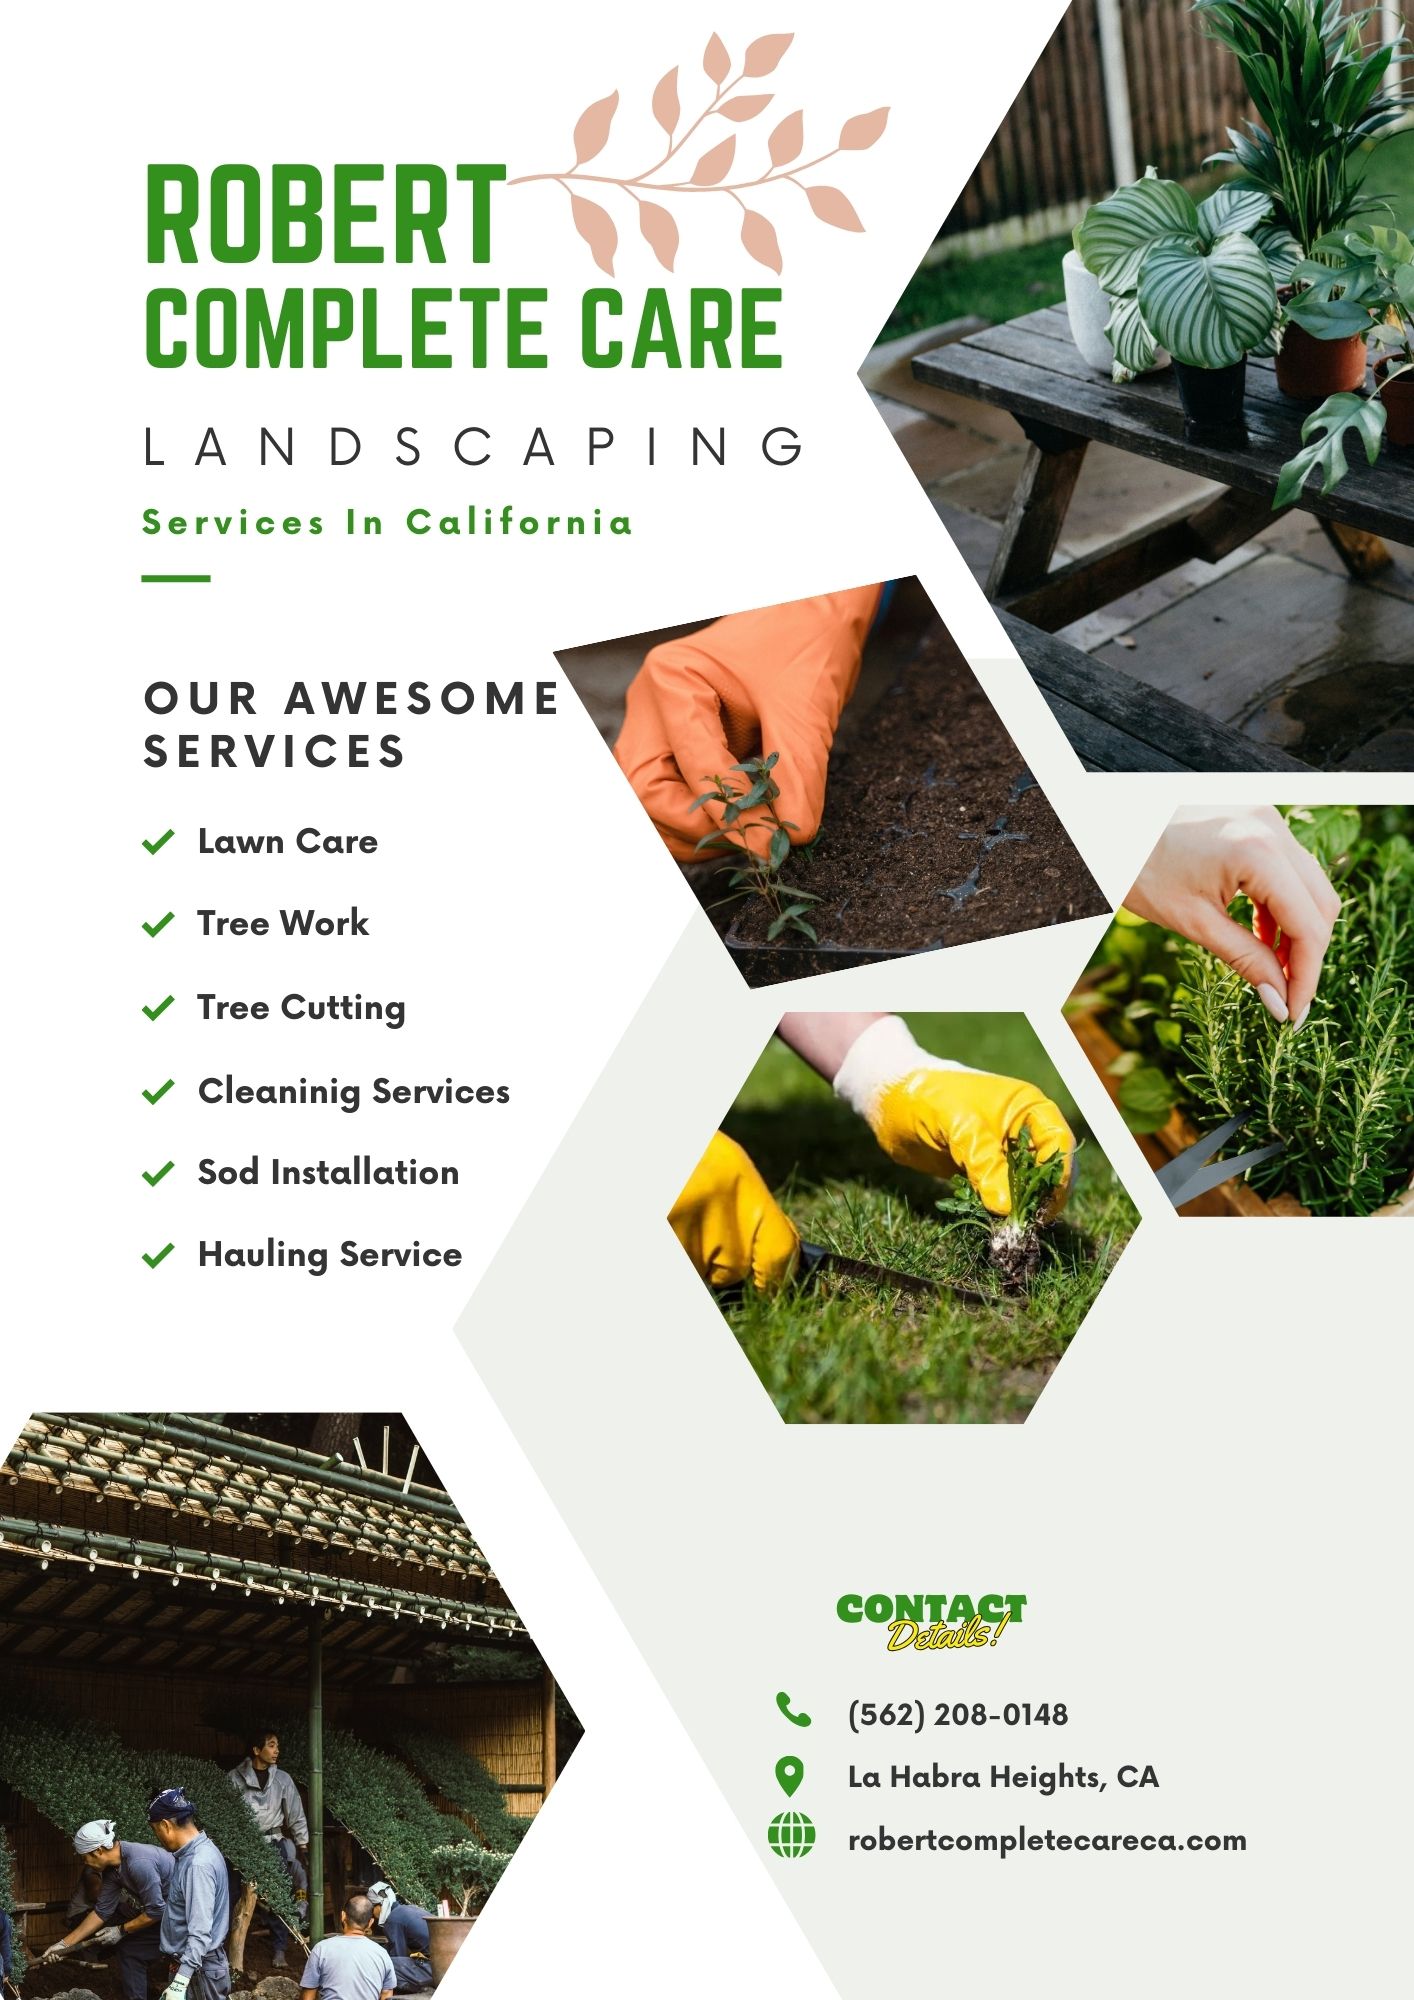 ROBERT
COMPLETE CARE

LANDSCAPING

Services In California

OUR AWESOME
SERVICES

+ Lawn Care
Tree Work
Tree Cutting

v

v

+ Cleaninig Services
+ Sod Installation
v

Hauling Service

 

S. (562) 208-0148
© La Habra Heights, CA

200

6 robertcompletecareca.com